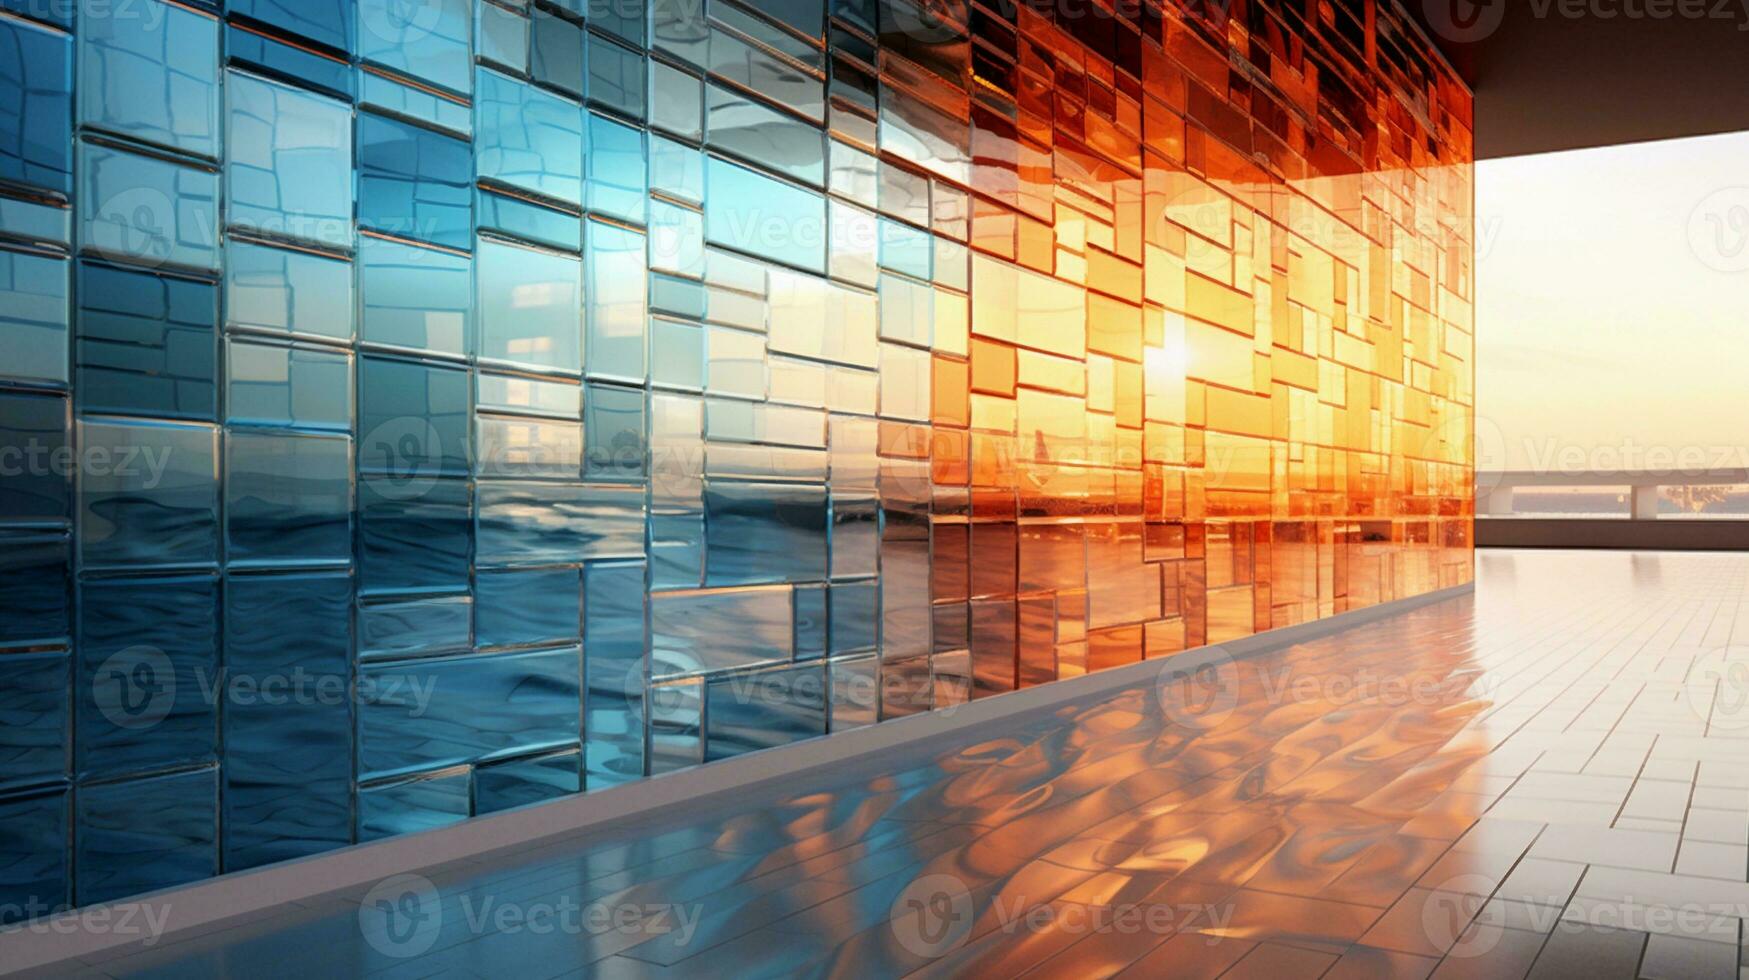 An artistic portrayal of a unique architectural structure adorned with textured glass tiles, providing space for text, background image, AI generated photo